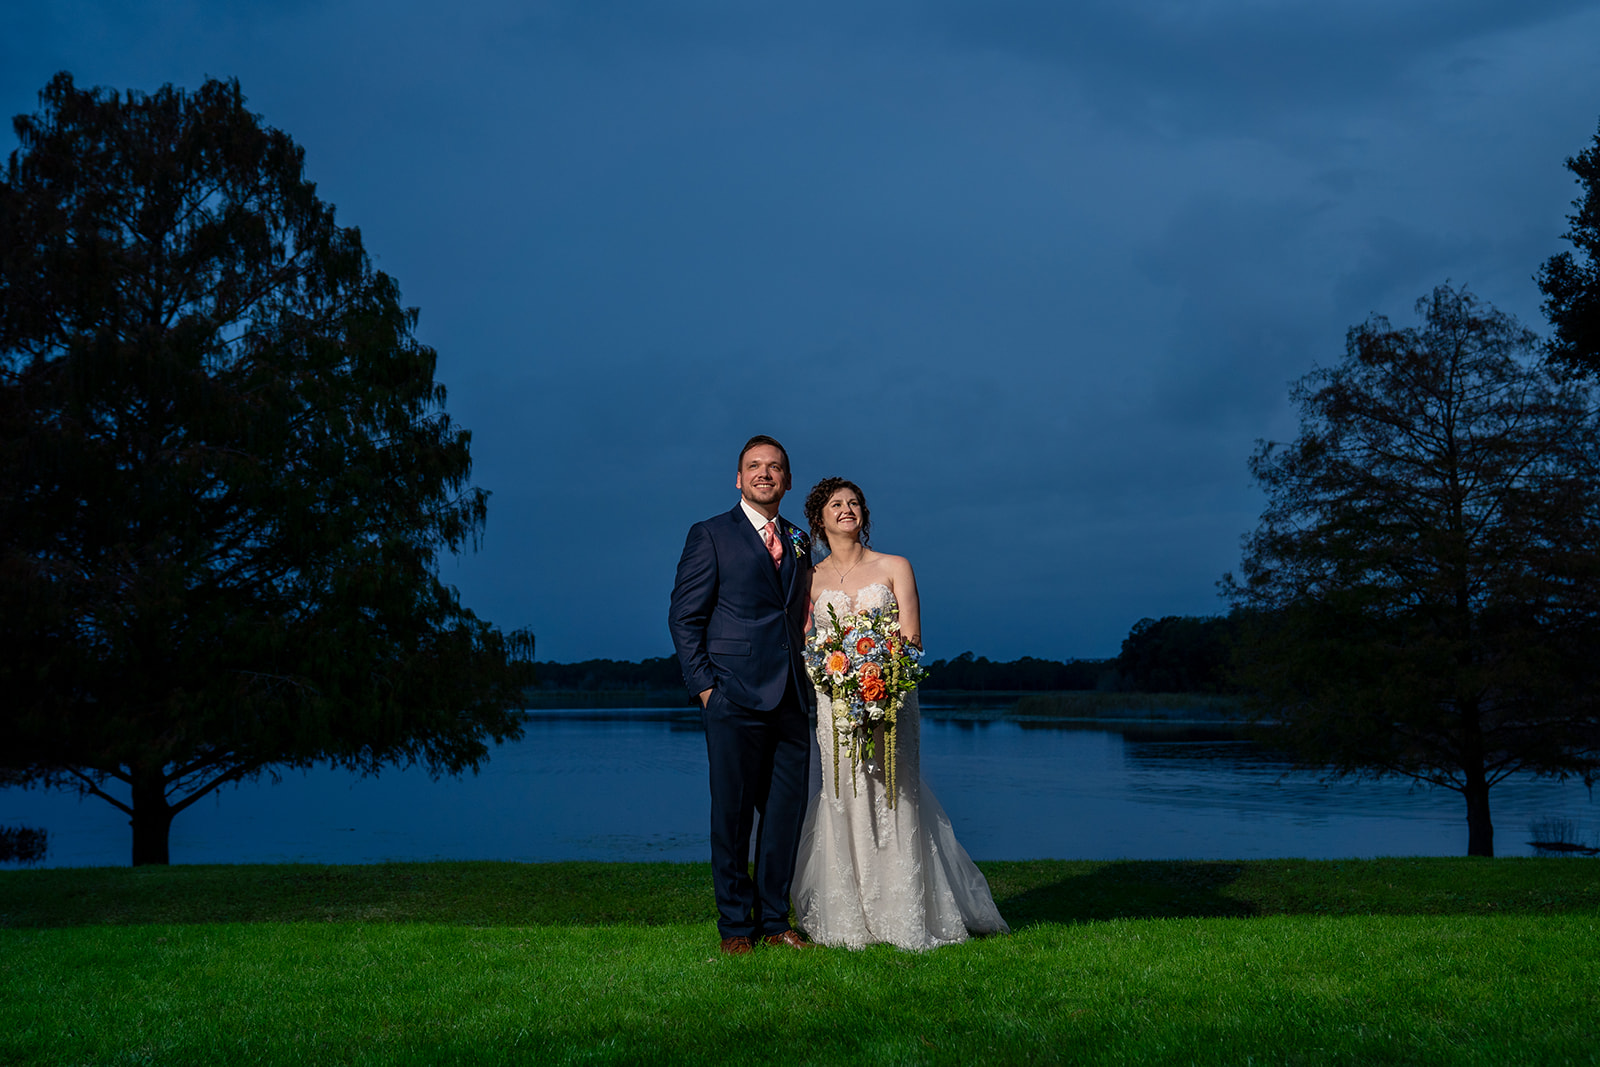 Sunset photo with bride and groom at Lake Mary Events Center